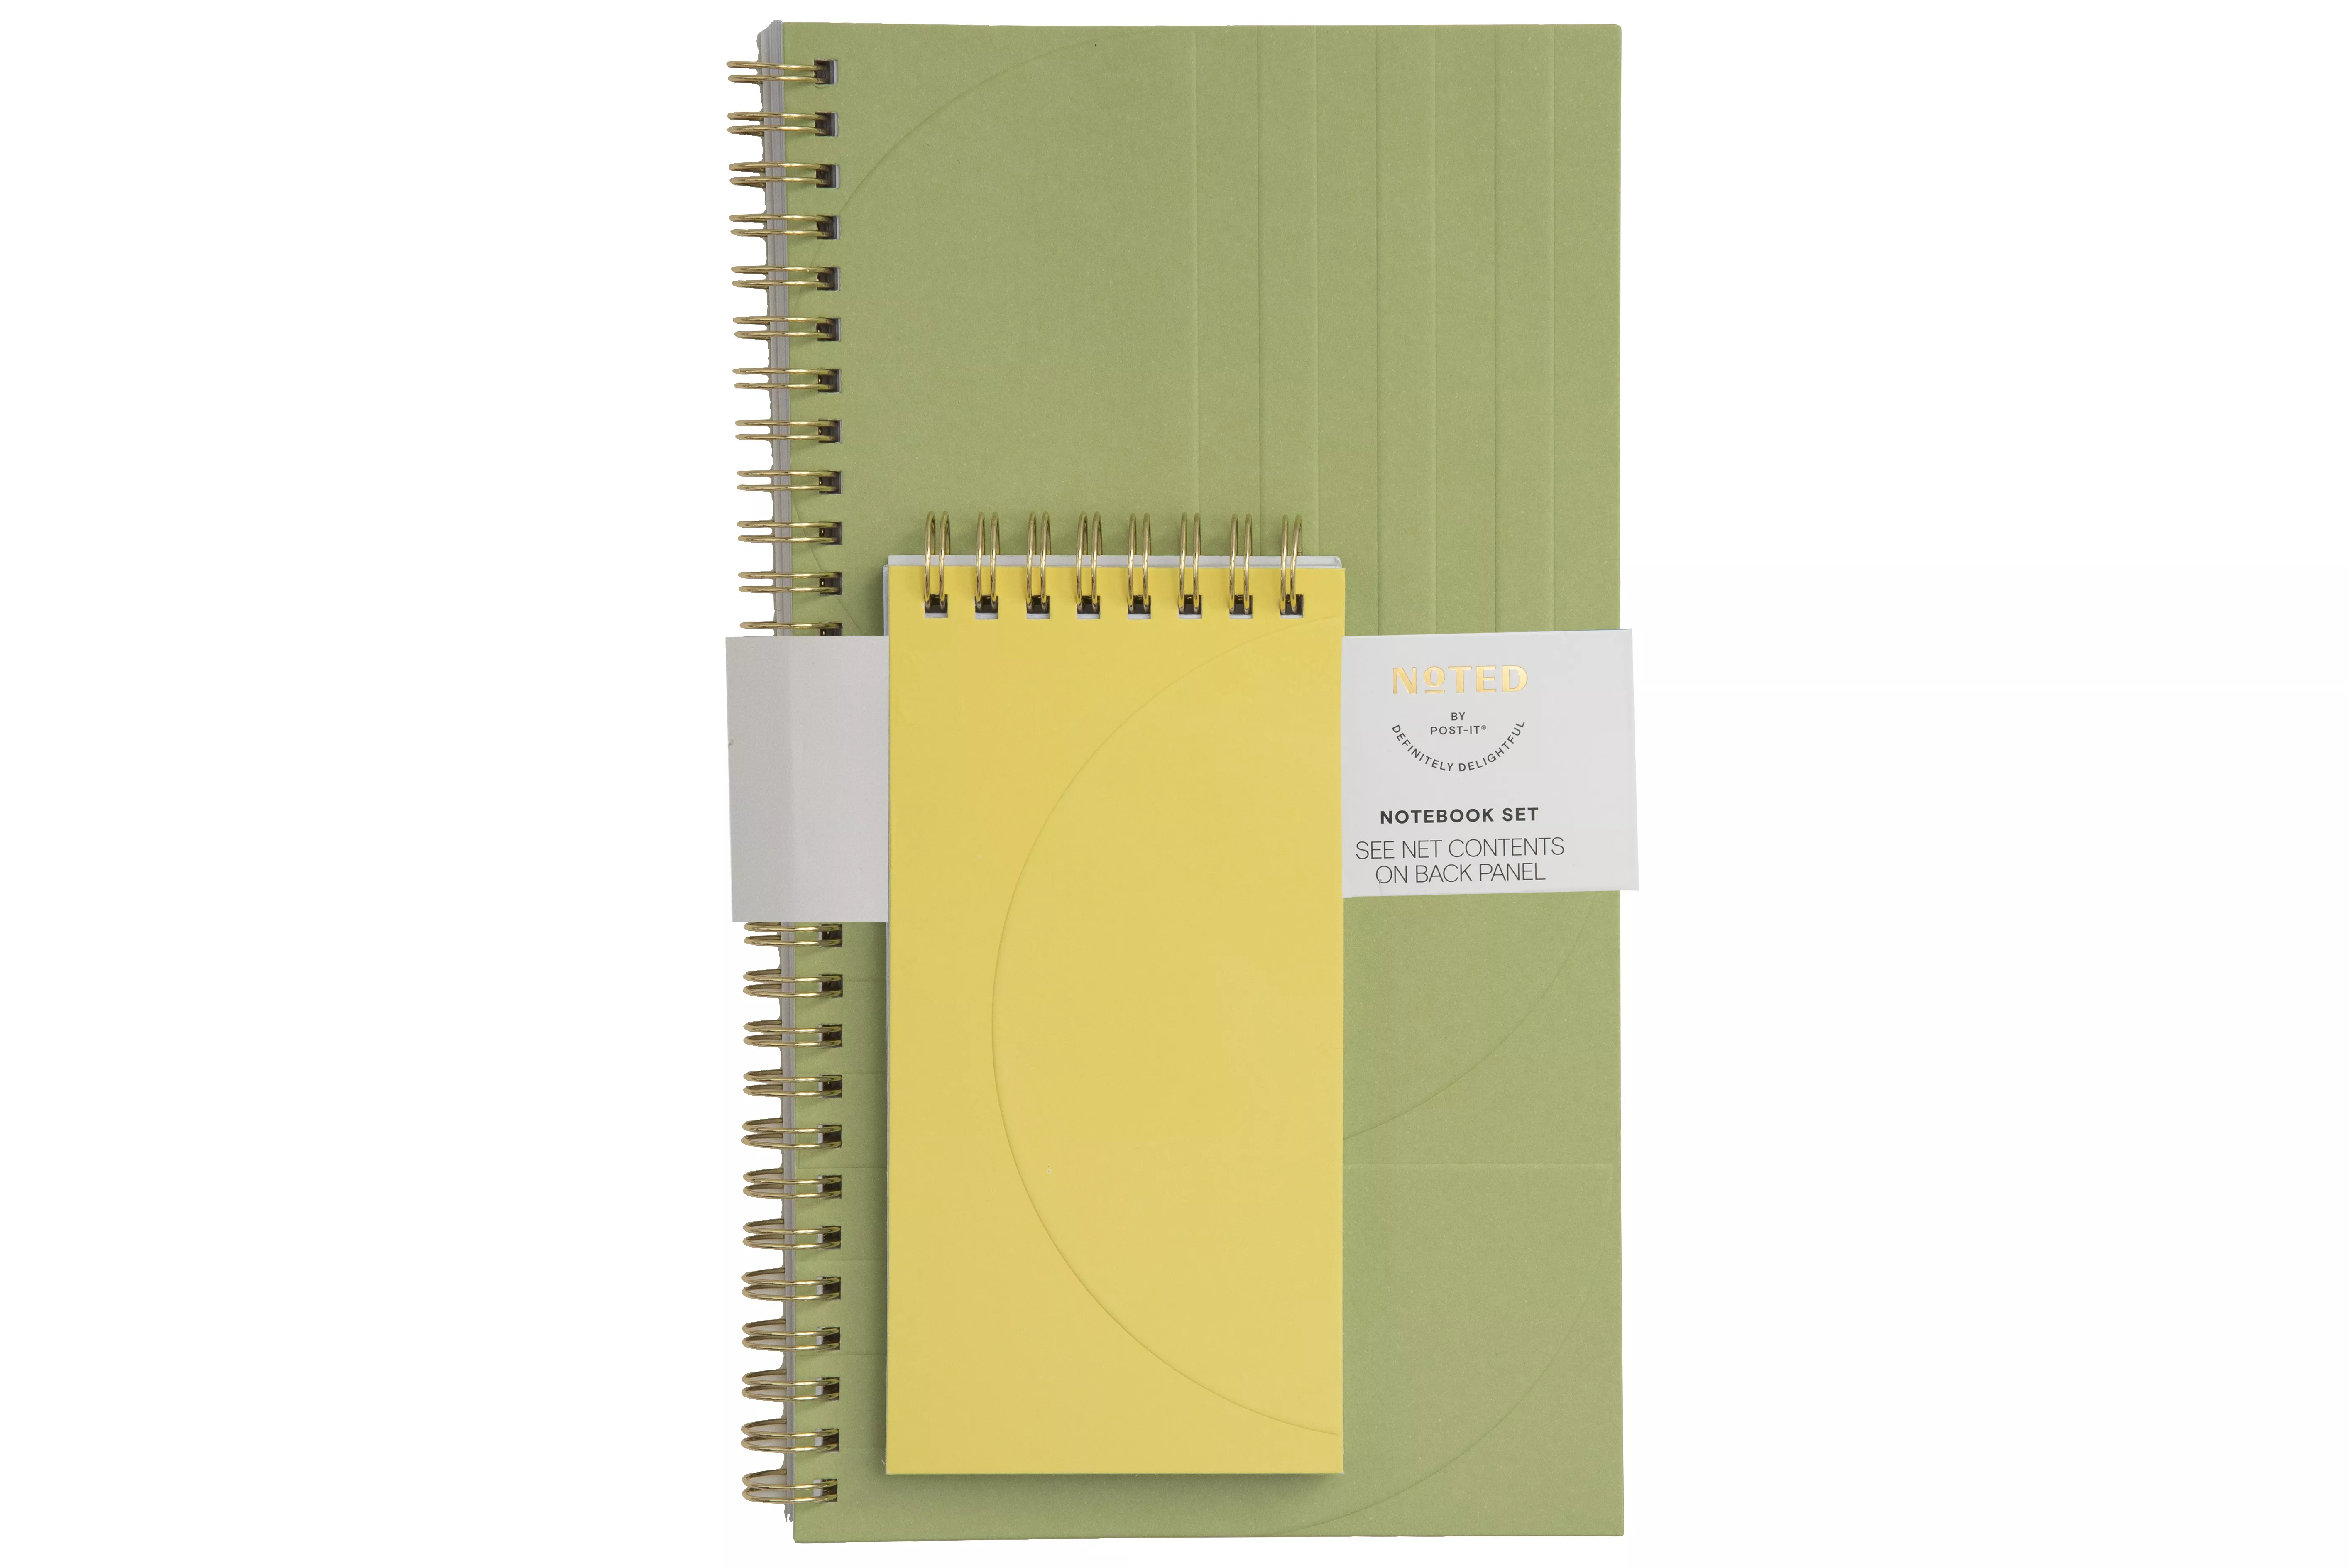 Post-it® Notebook Set NTD6-NBSET-3, 3 in x 6 in (76 mm x 152 mm) 150 pages and 5.5 in x 10 in (139.7 mm x 254 mm) 150 pages